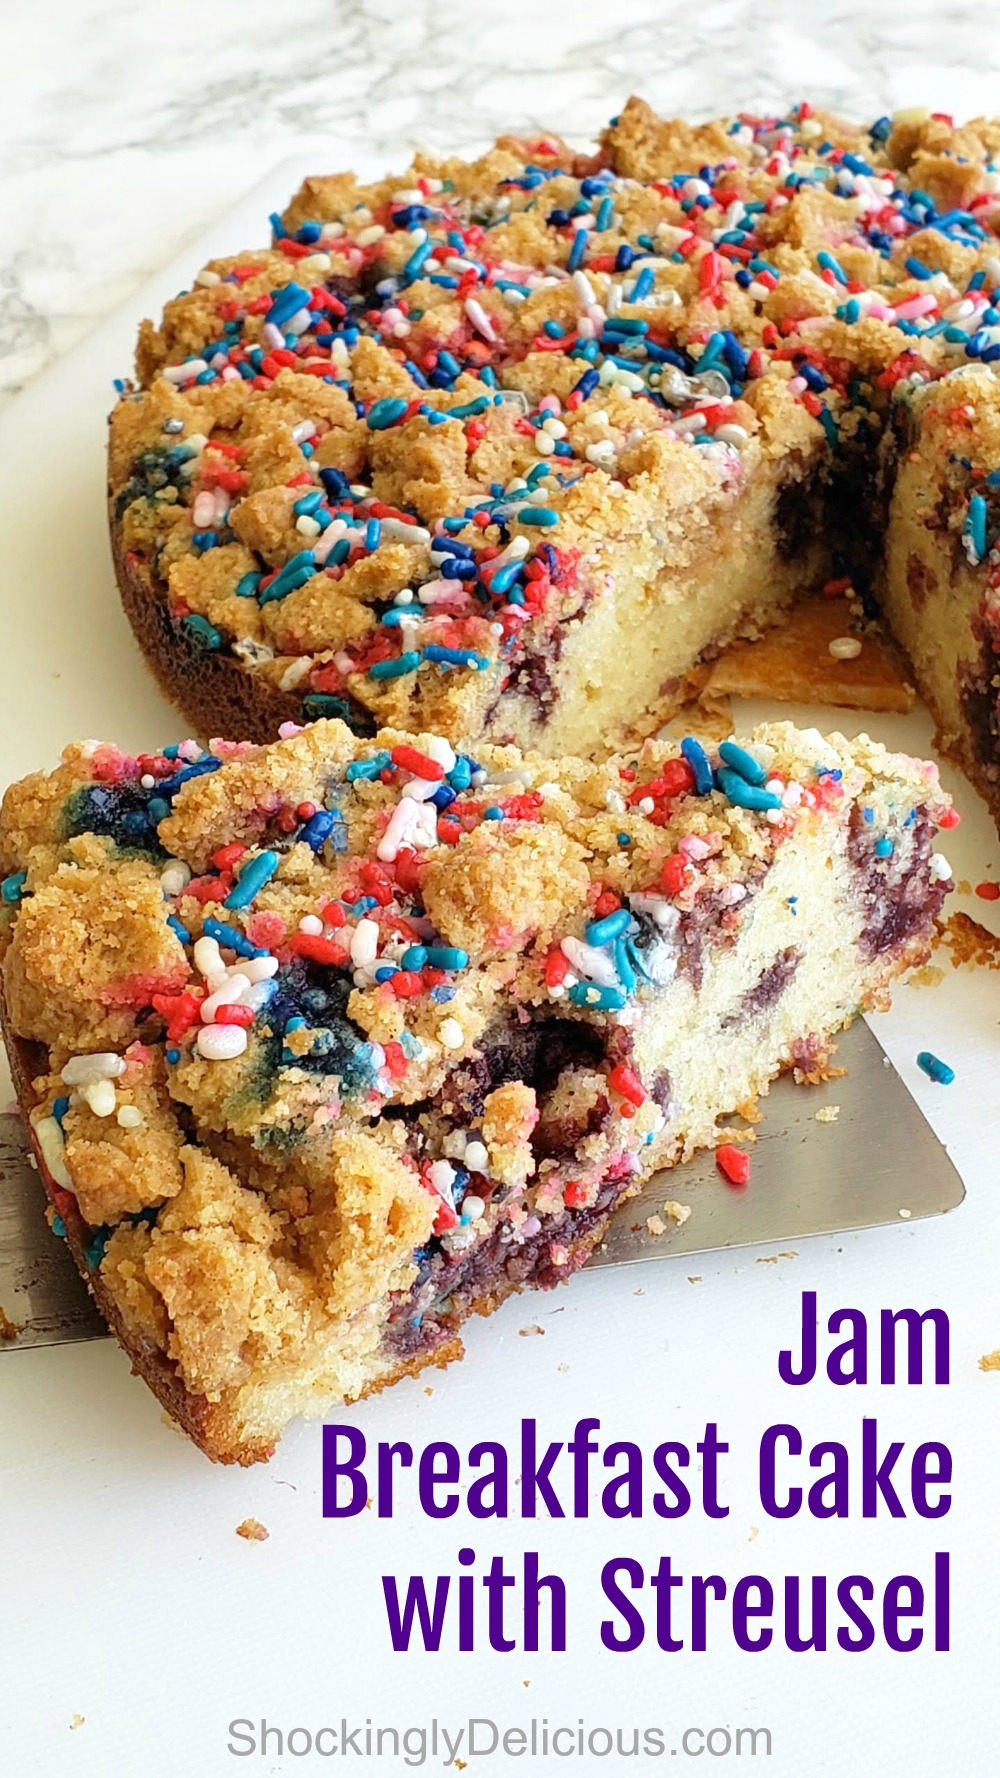 Spatula is removing a wedge of Jam Breakfast Cake with Streusel on ShockinglyDelicious.com